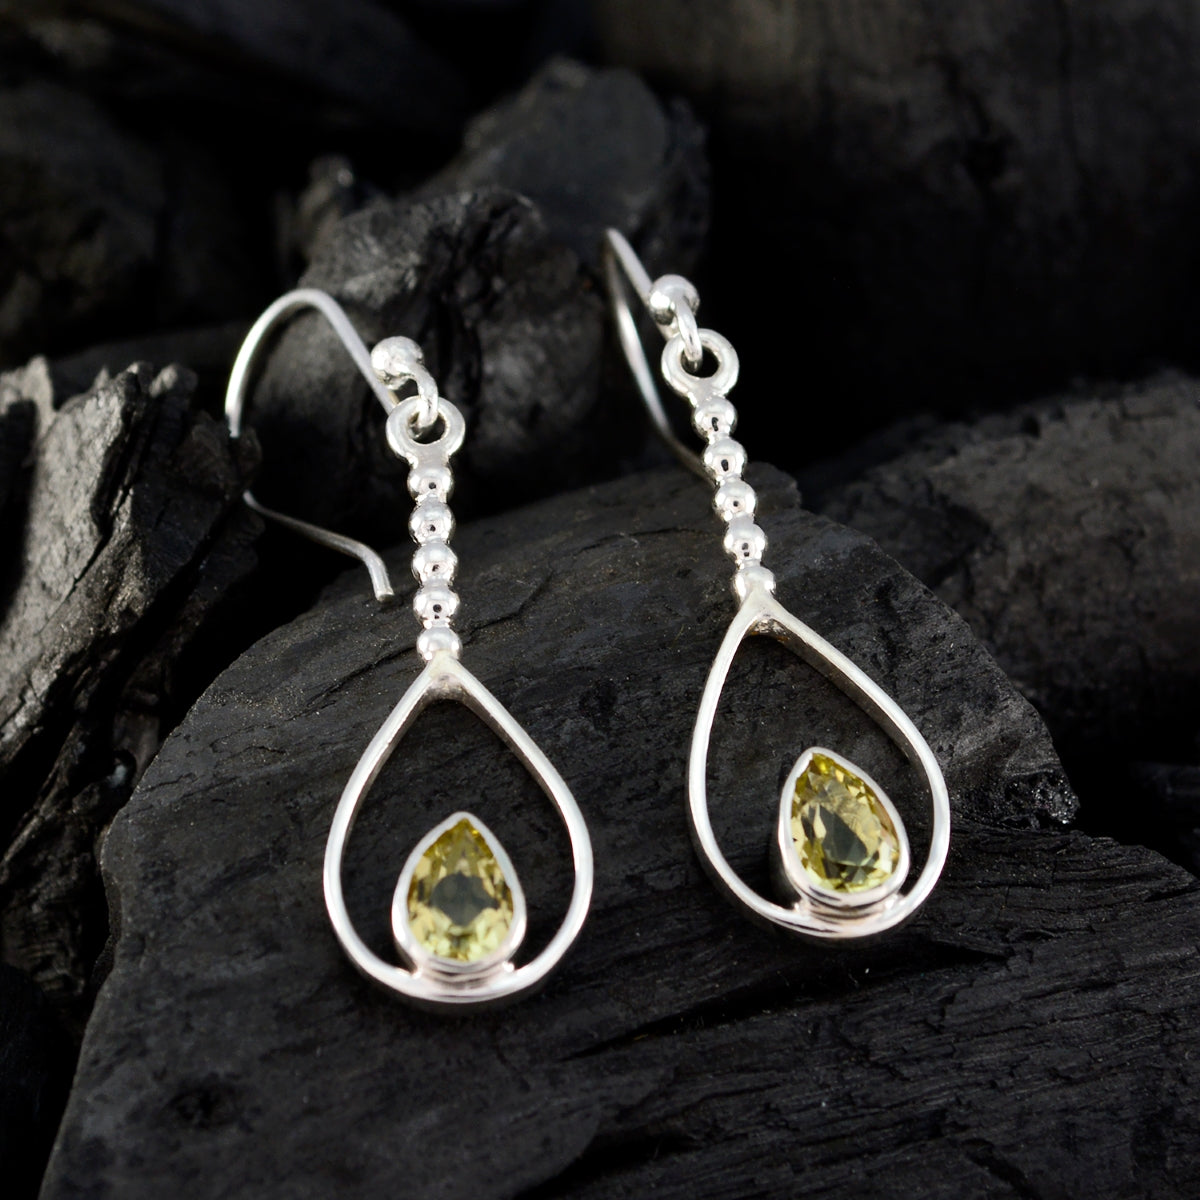 Riyo Real Gemstones Pear Faceted Yellow Lemon Quartz Silver Earring mother's day gift